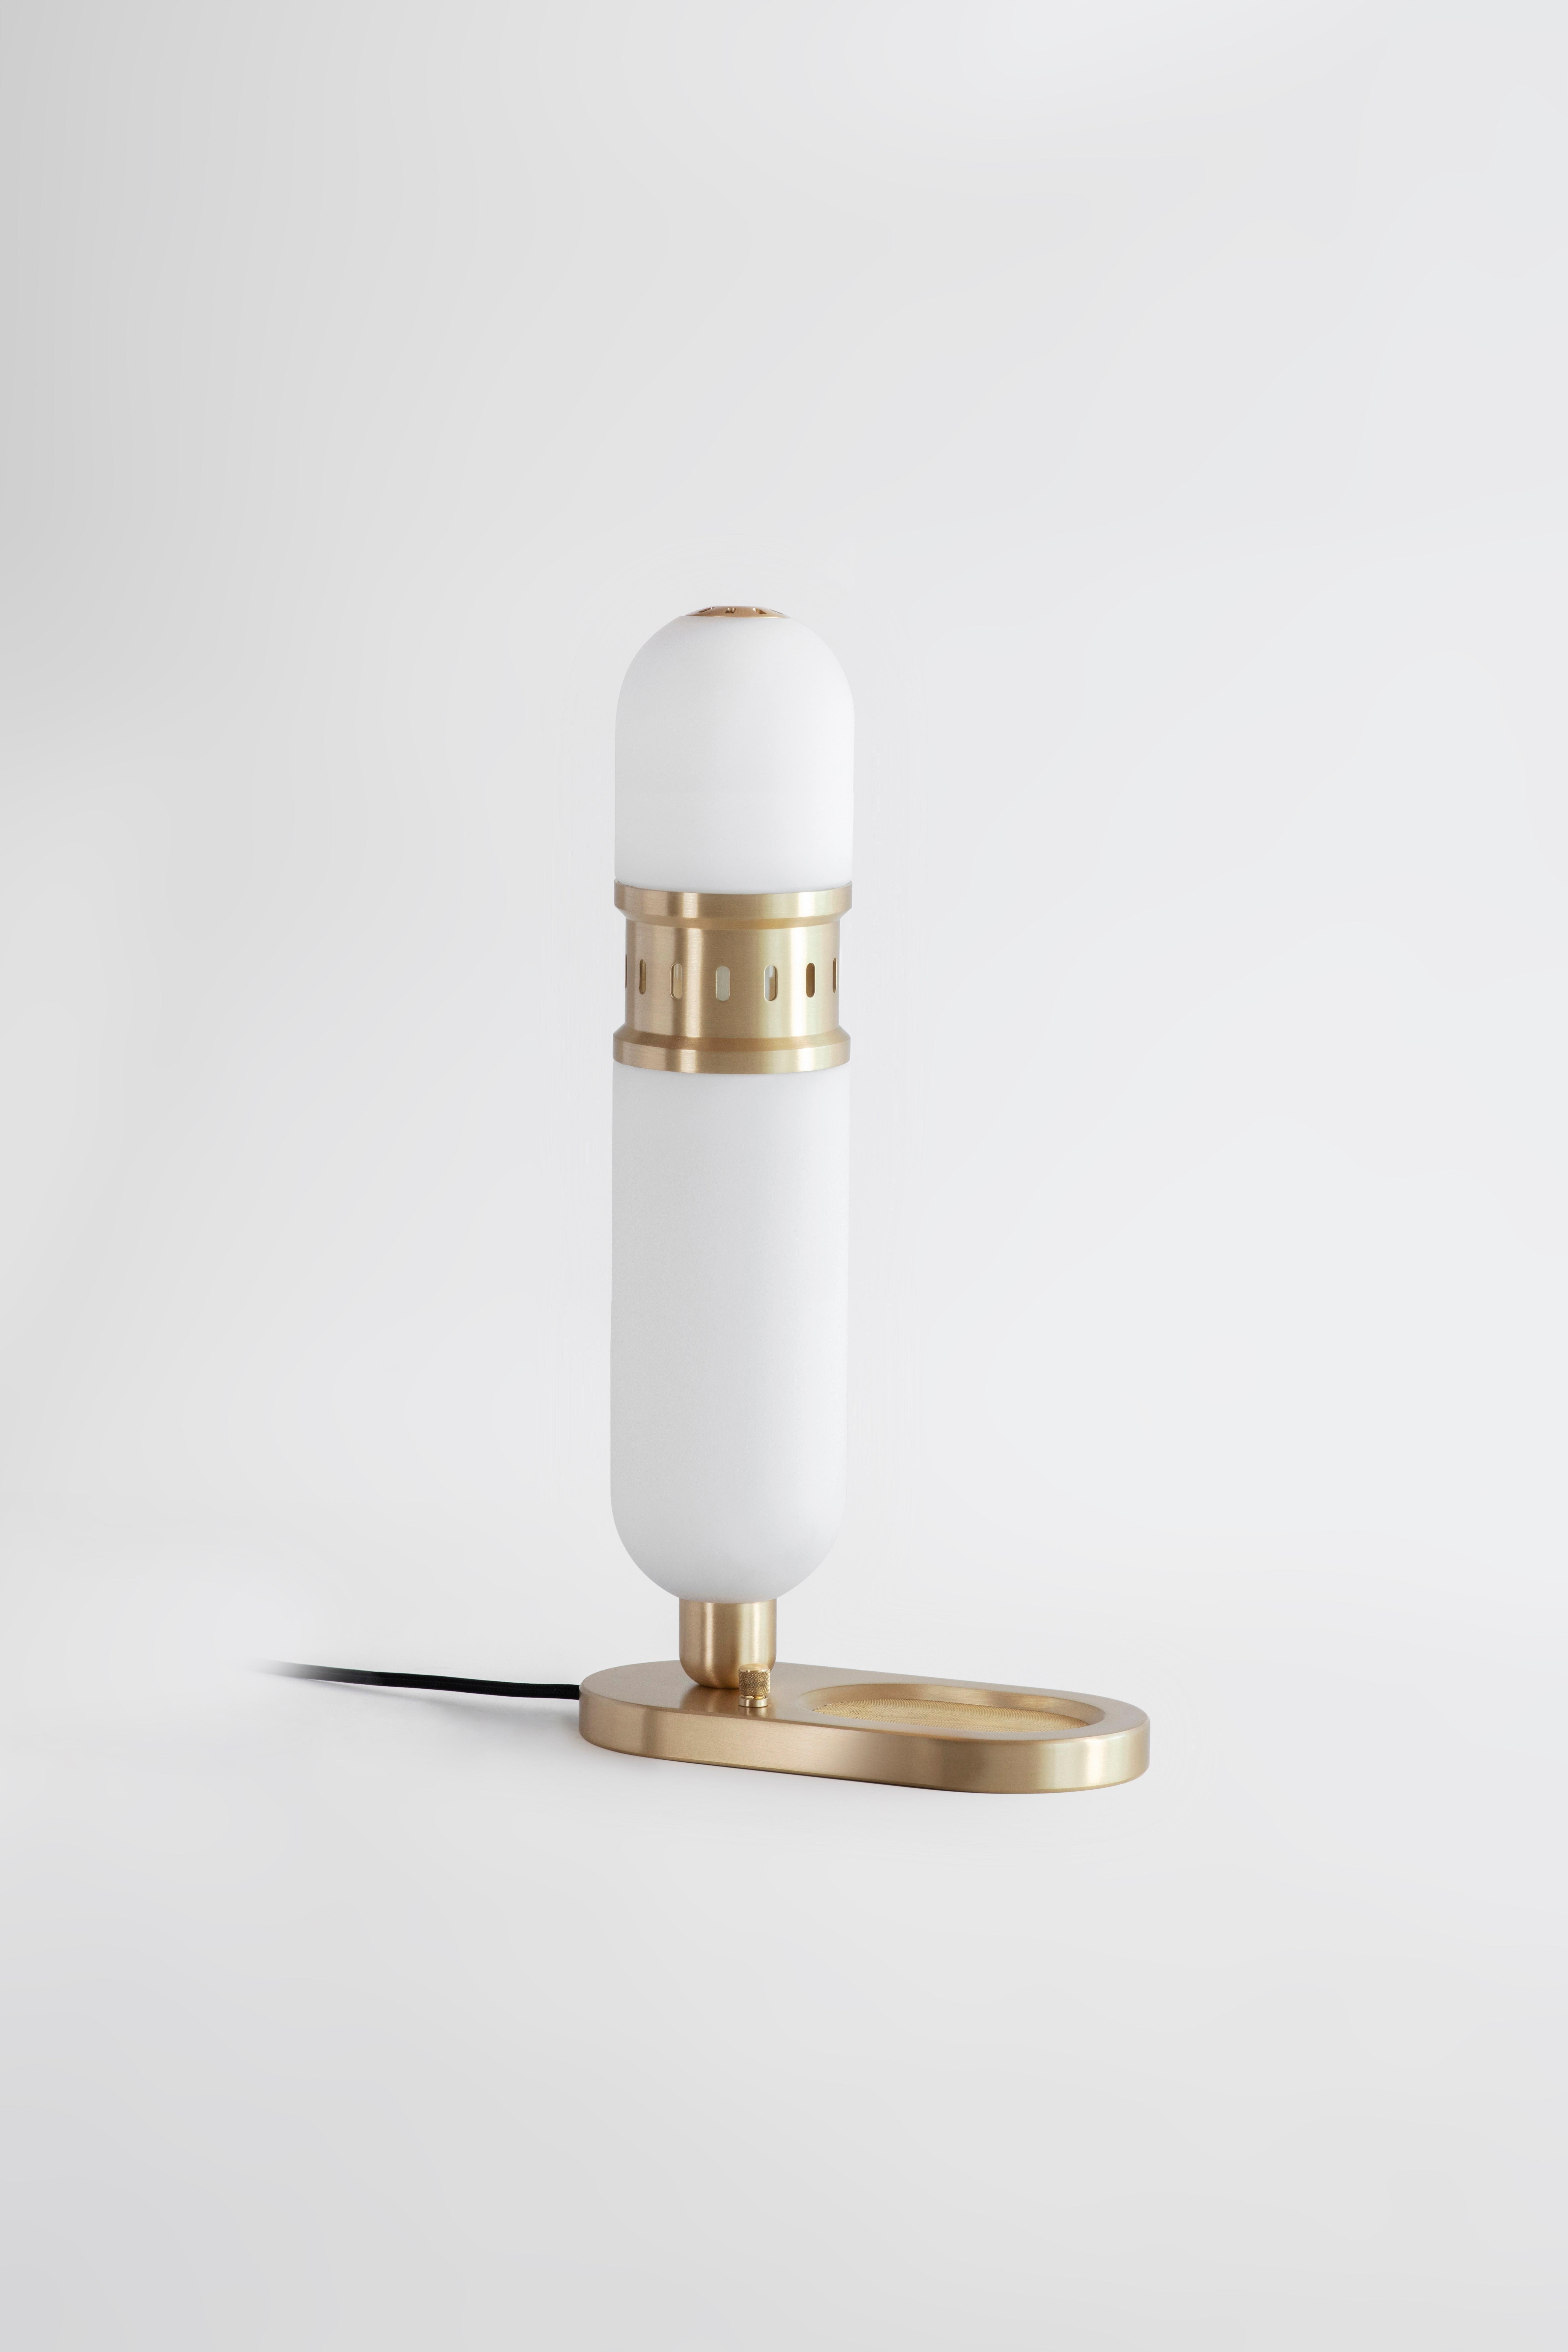 Occulo brass table lamp II by Bert Frank
Dimensions: 12.5 x 25 x H 46 cm 
Materials: brass, glass
Available in brushed brass, dark bronze or satin nickel.

All our lamps can be wired according to each country. If sold to the USA it will be